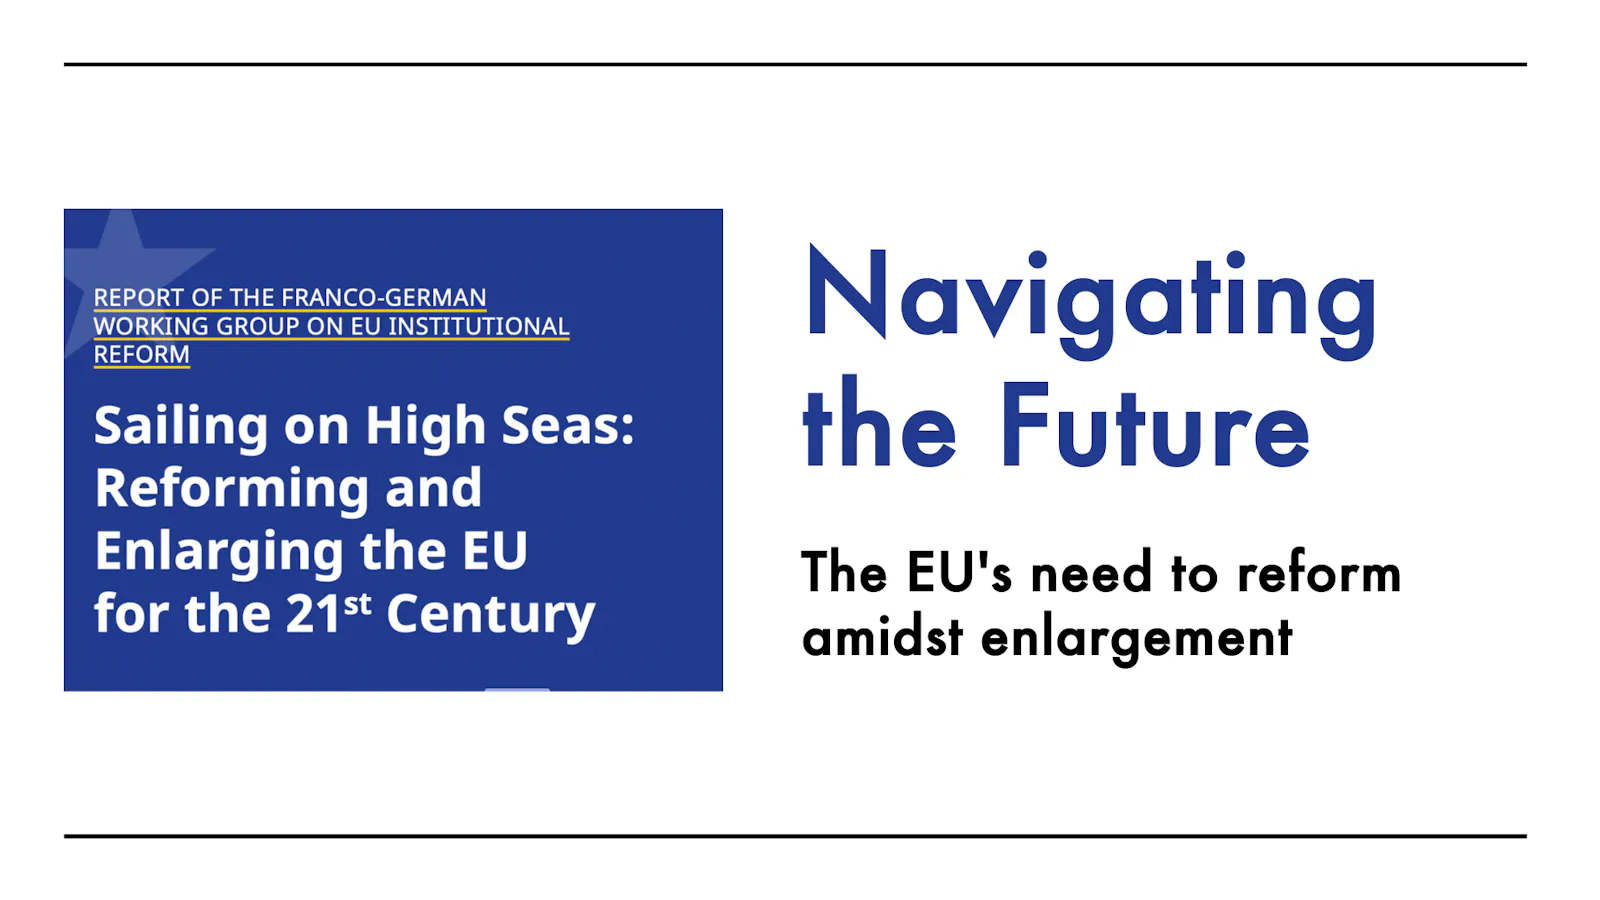 Navigating the Future: The EU's need to reform amidst enlargement